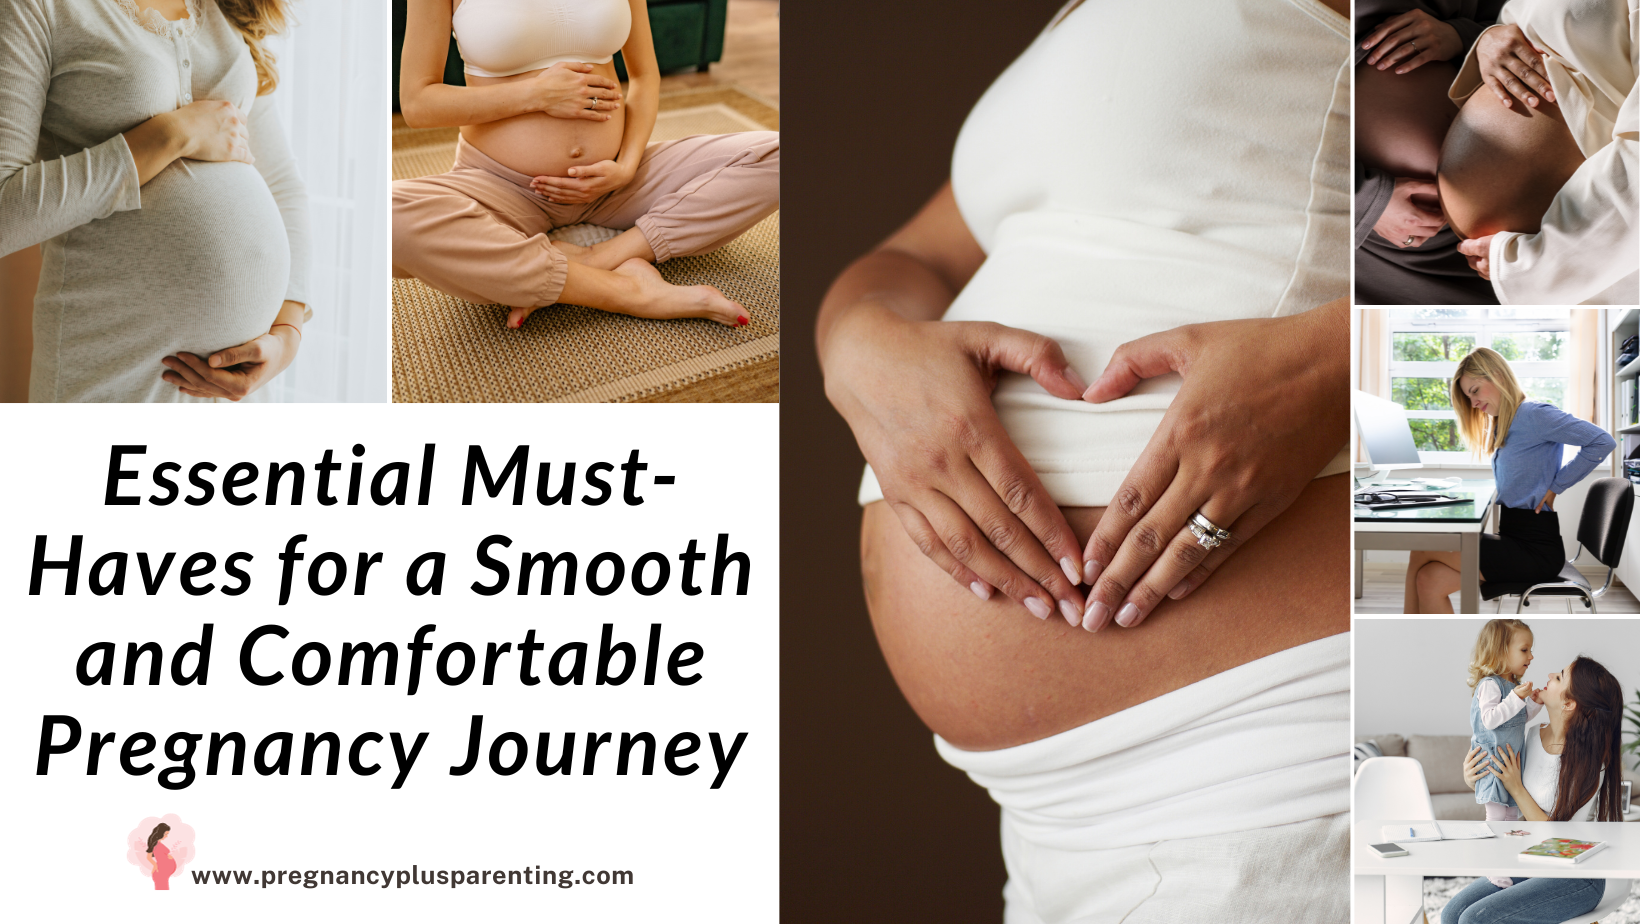 Essential Must-Haves for a Smooth and Comfortable Pregnancy Journey